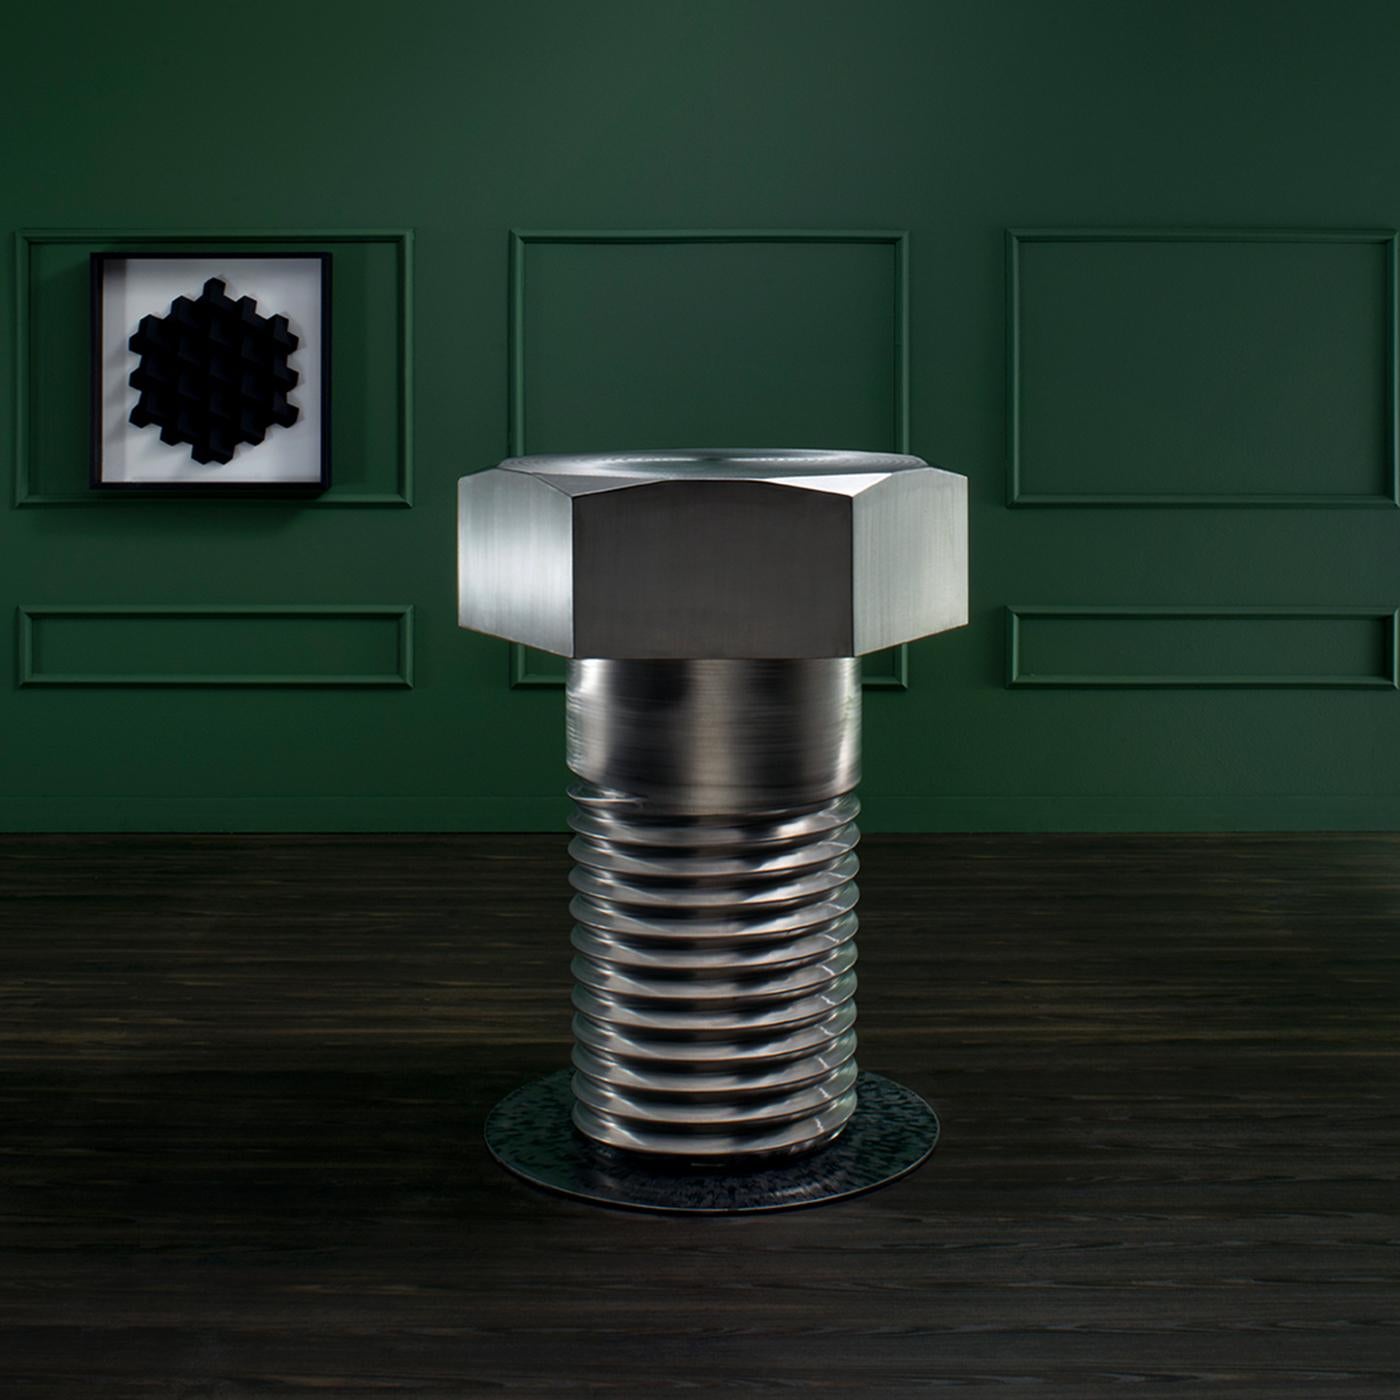 Functioning as a side table or as an element of interior decoration, this handcrafted table boasts an ingenious design. Shaped like a big, solid bolt, it is entirely made of stainless steel, and it can be completed with a set of bolt-inspired